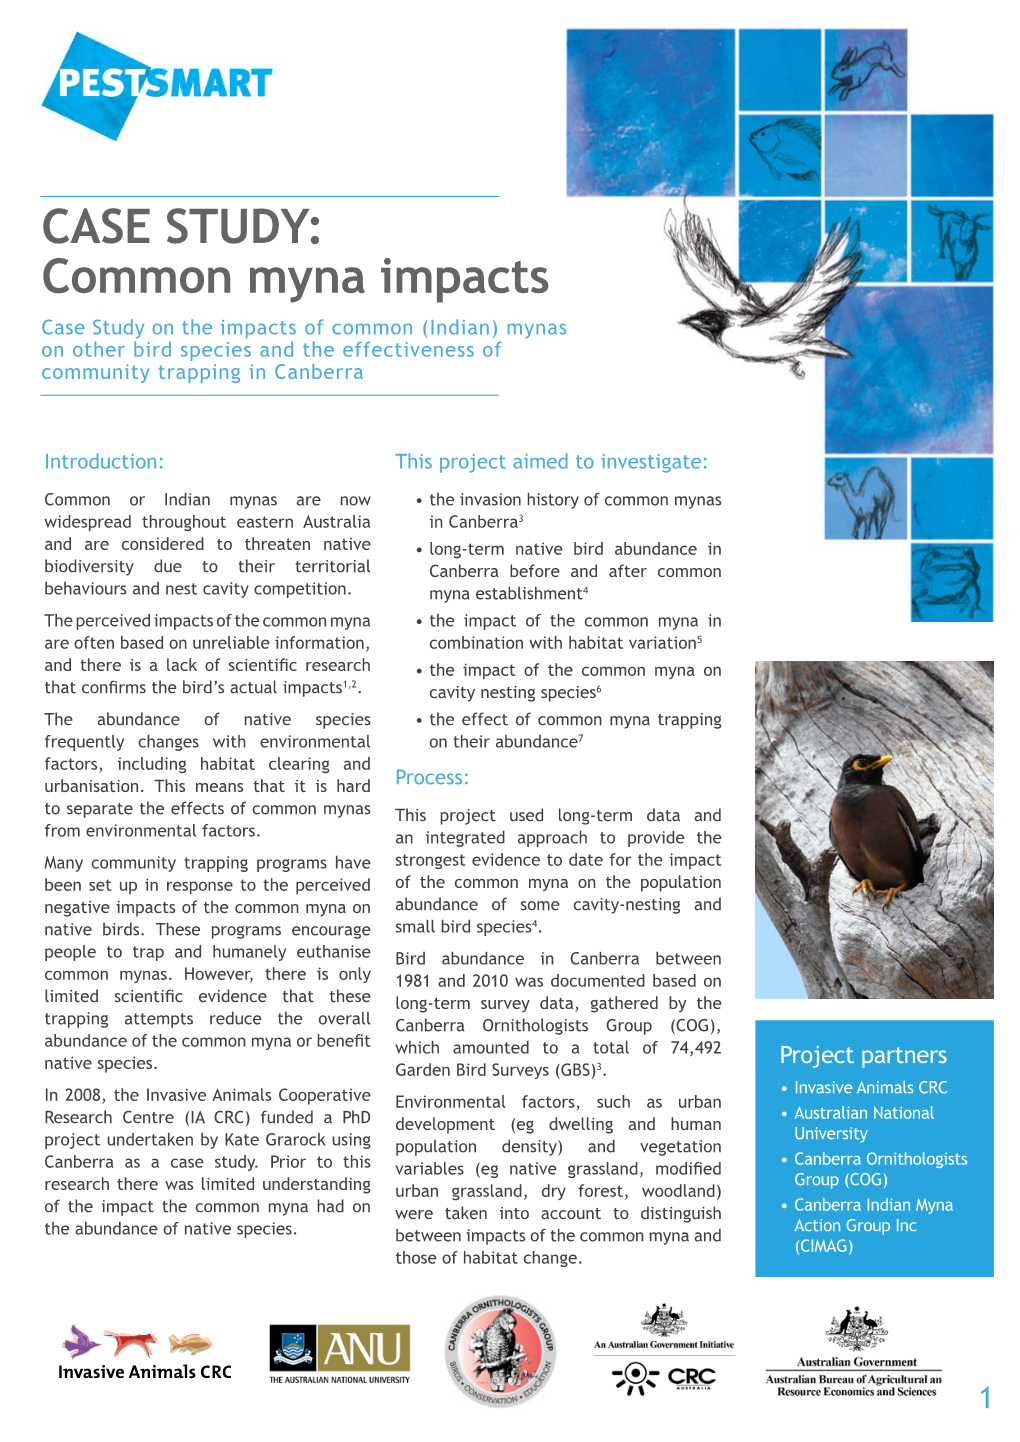 Common Myna Impacts Case Study on the Impacts of Common (Indian) Mynas on Other Bird Species and the Effectiveness of Community Trapping in Canberra